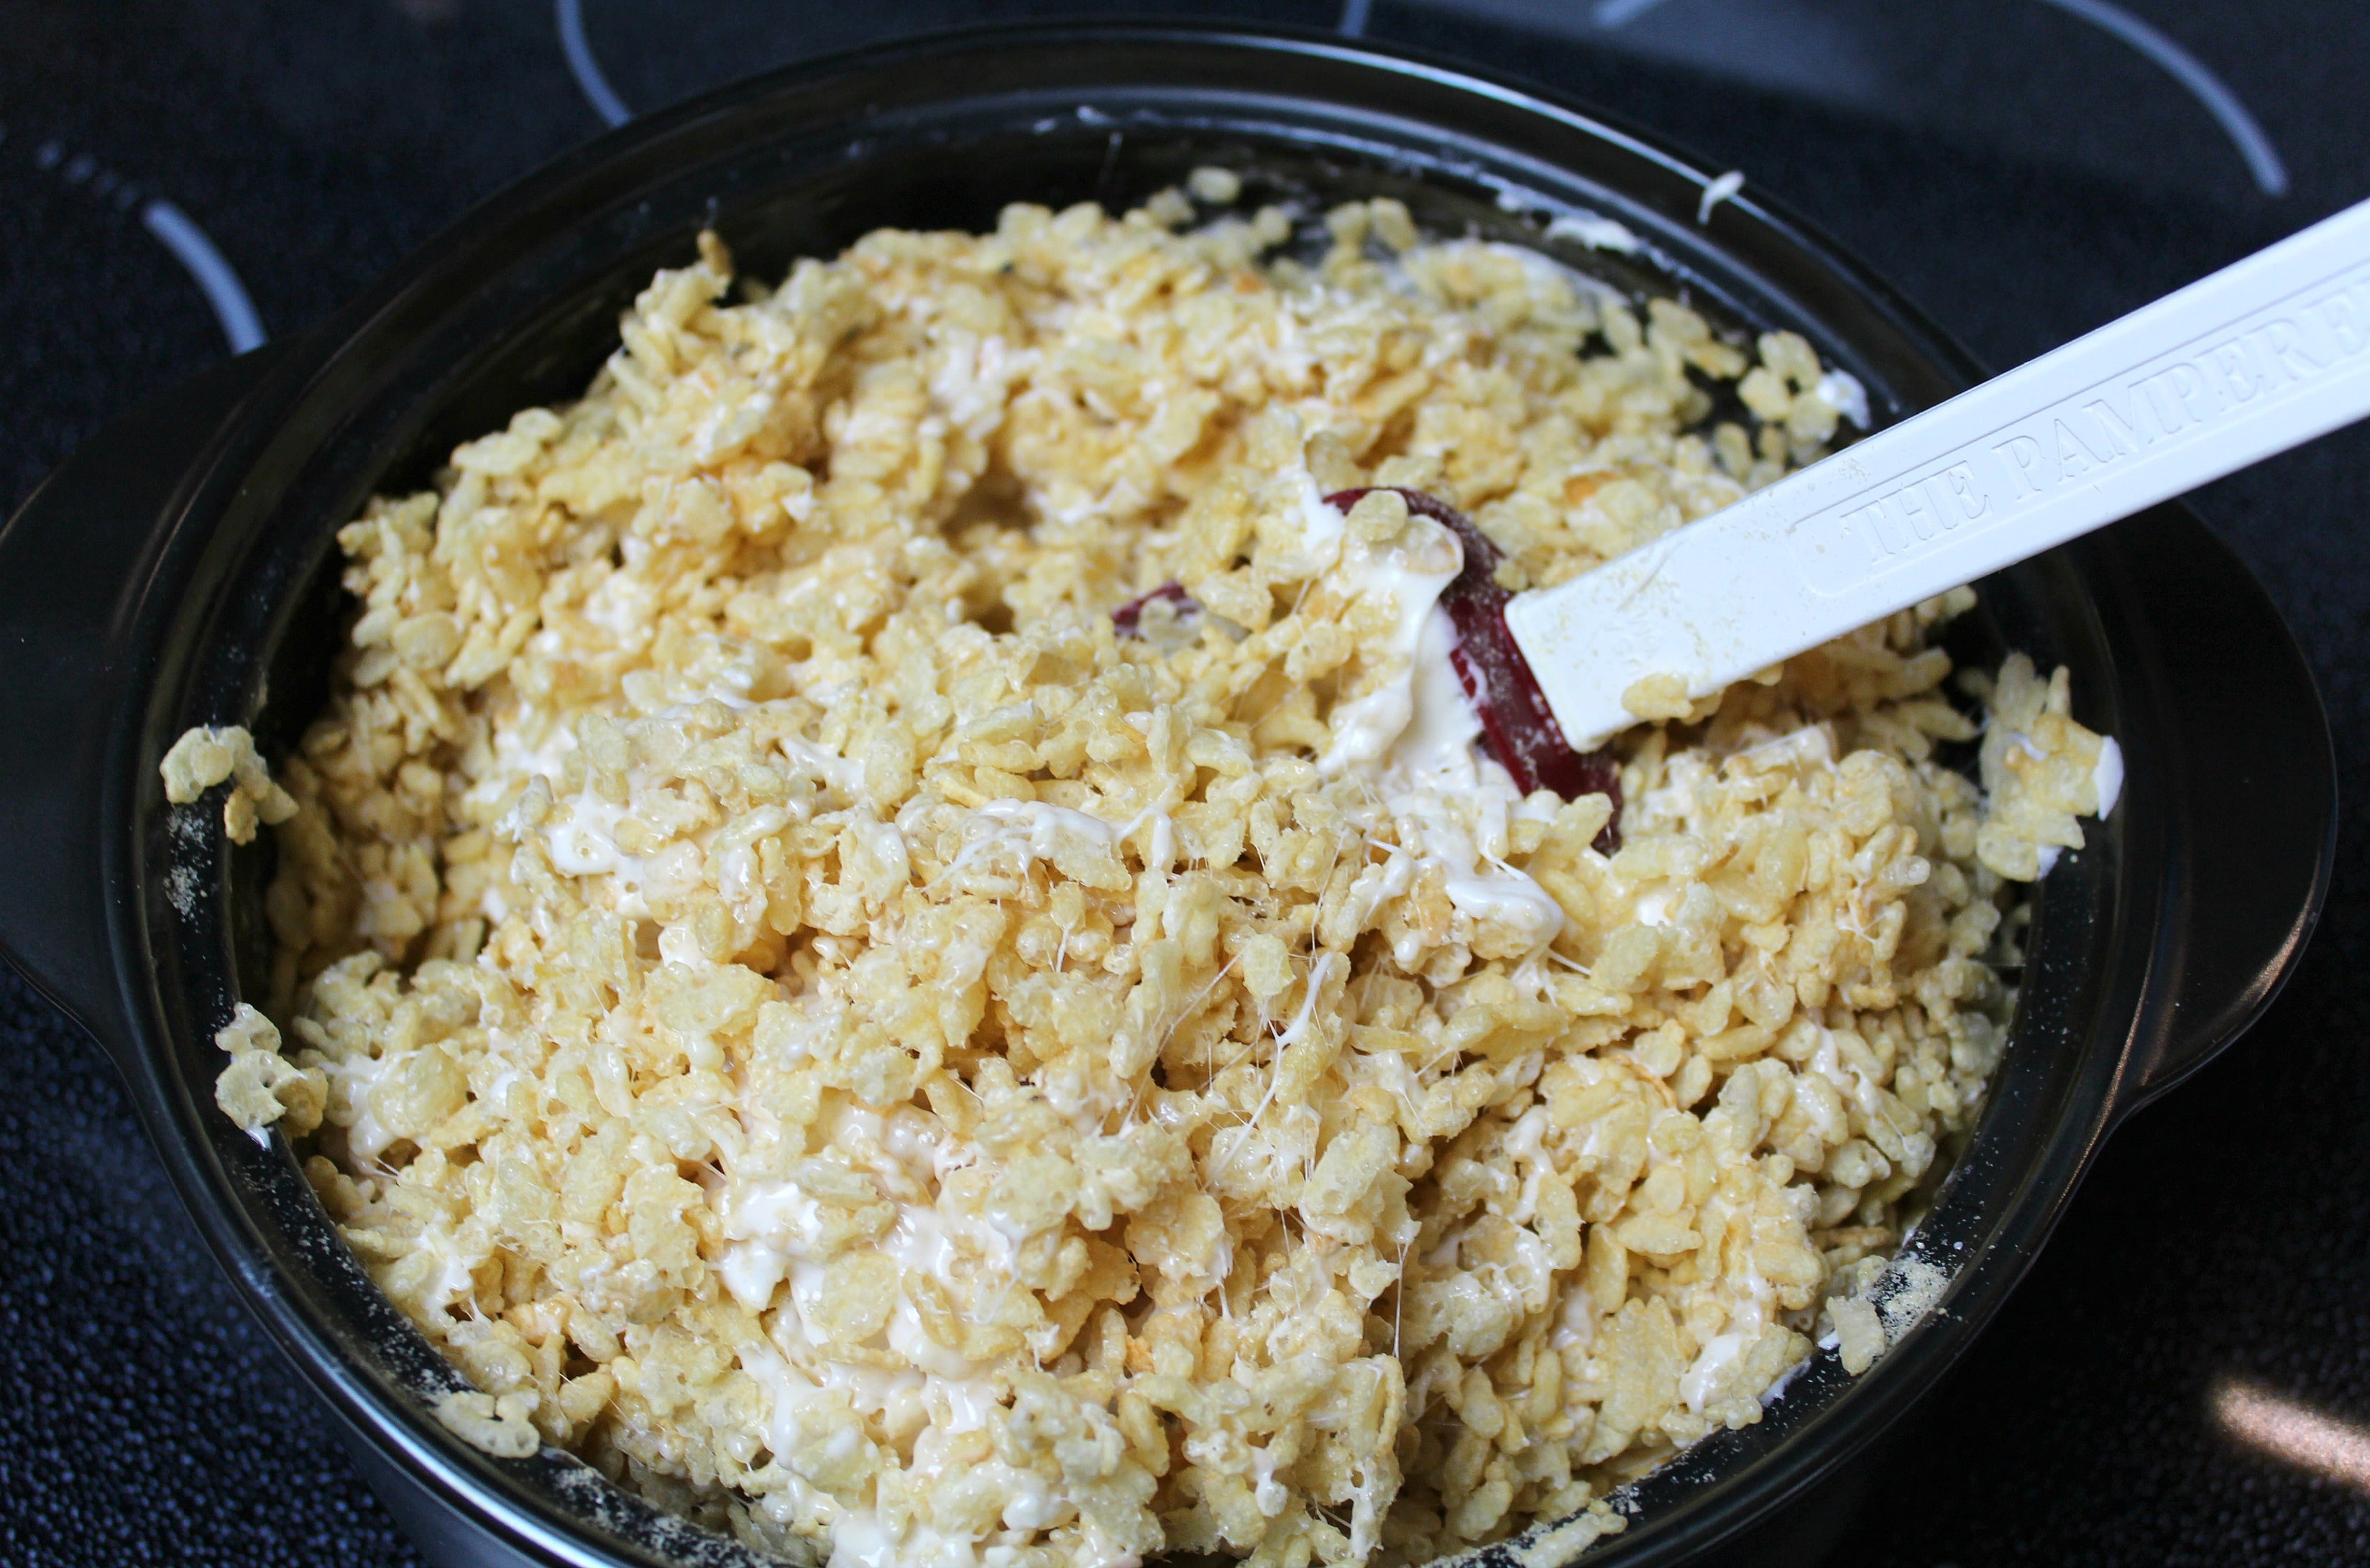 Stir the marshmallow into the rice crispies until they're thoroughly coated. 